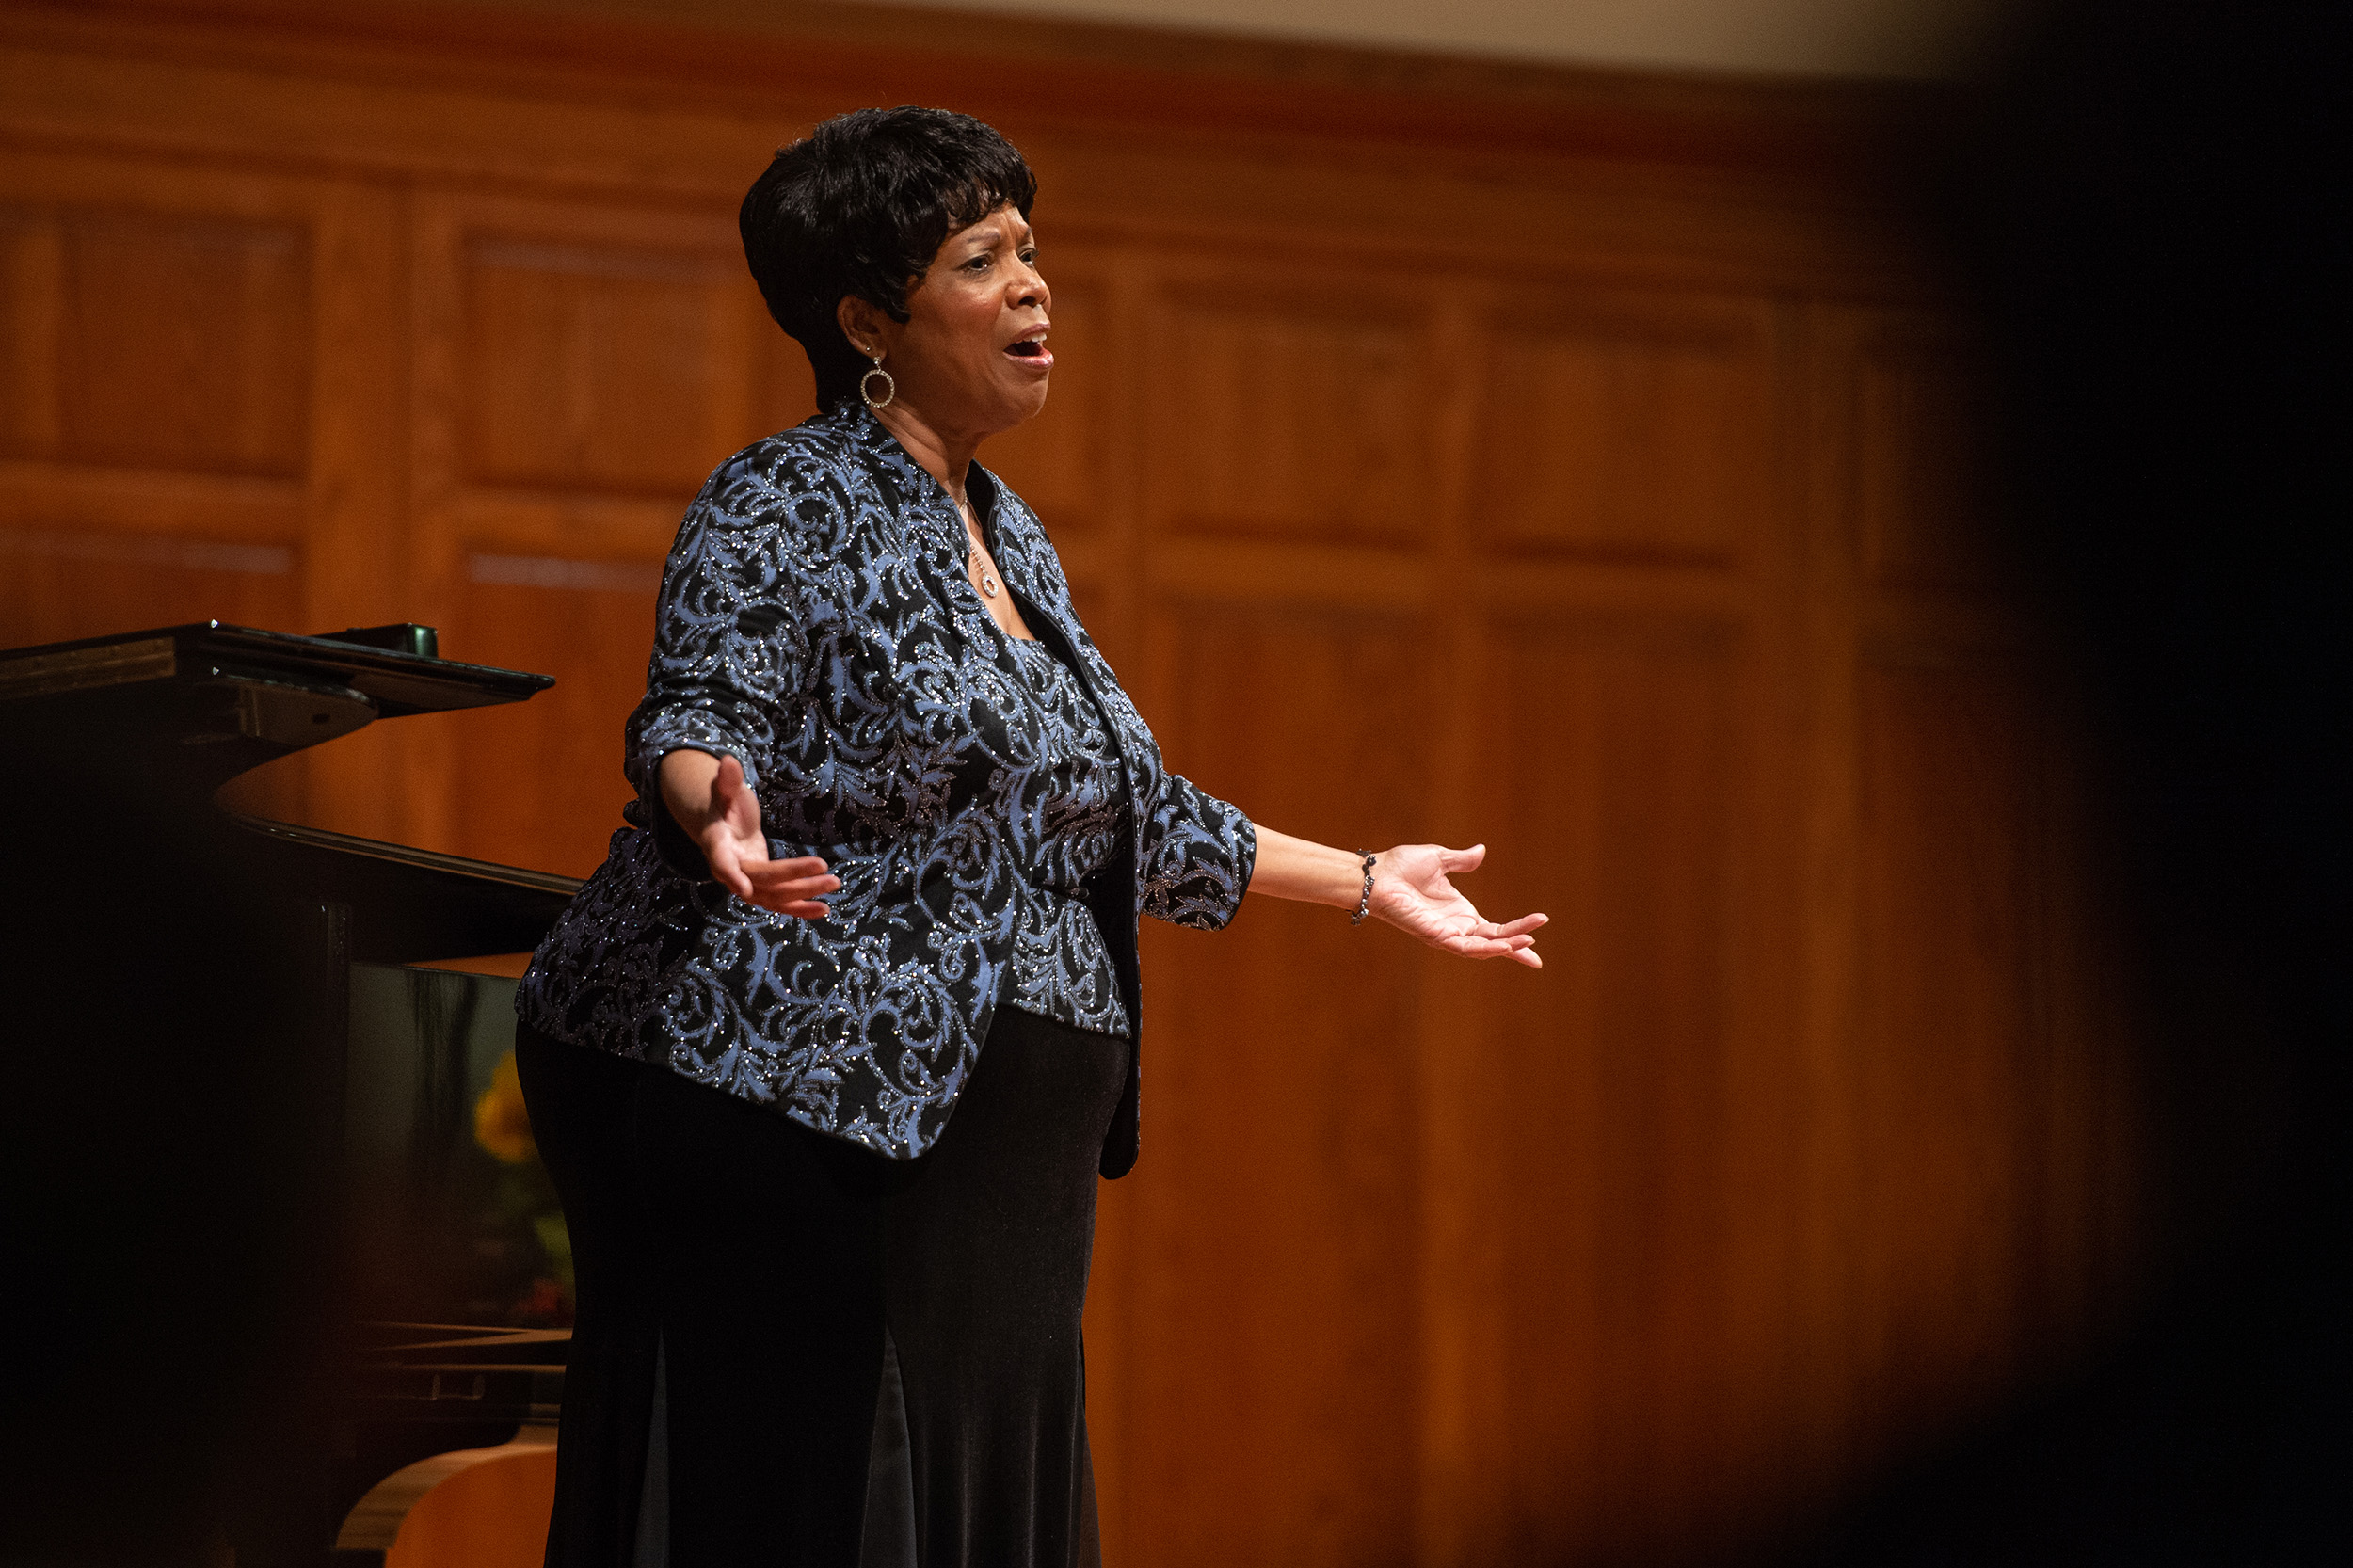 Songs by African American Composers performed by Dr. Carren Moham at Hesston College Homecoming 2022